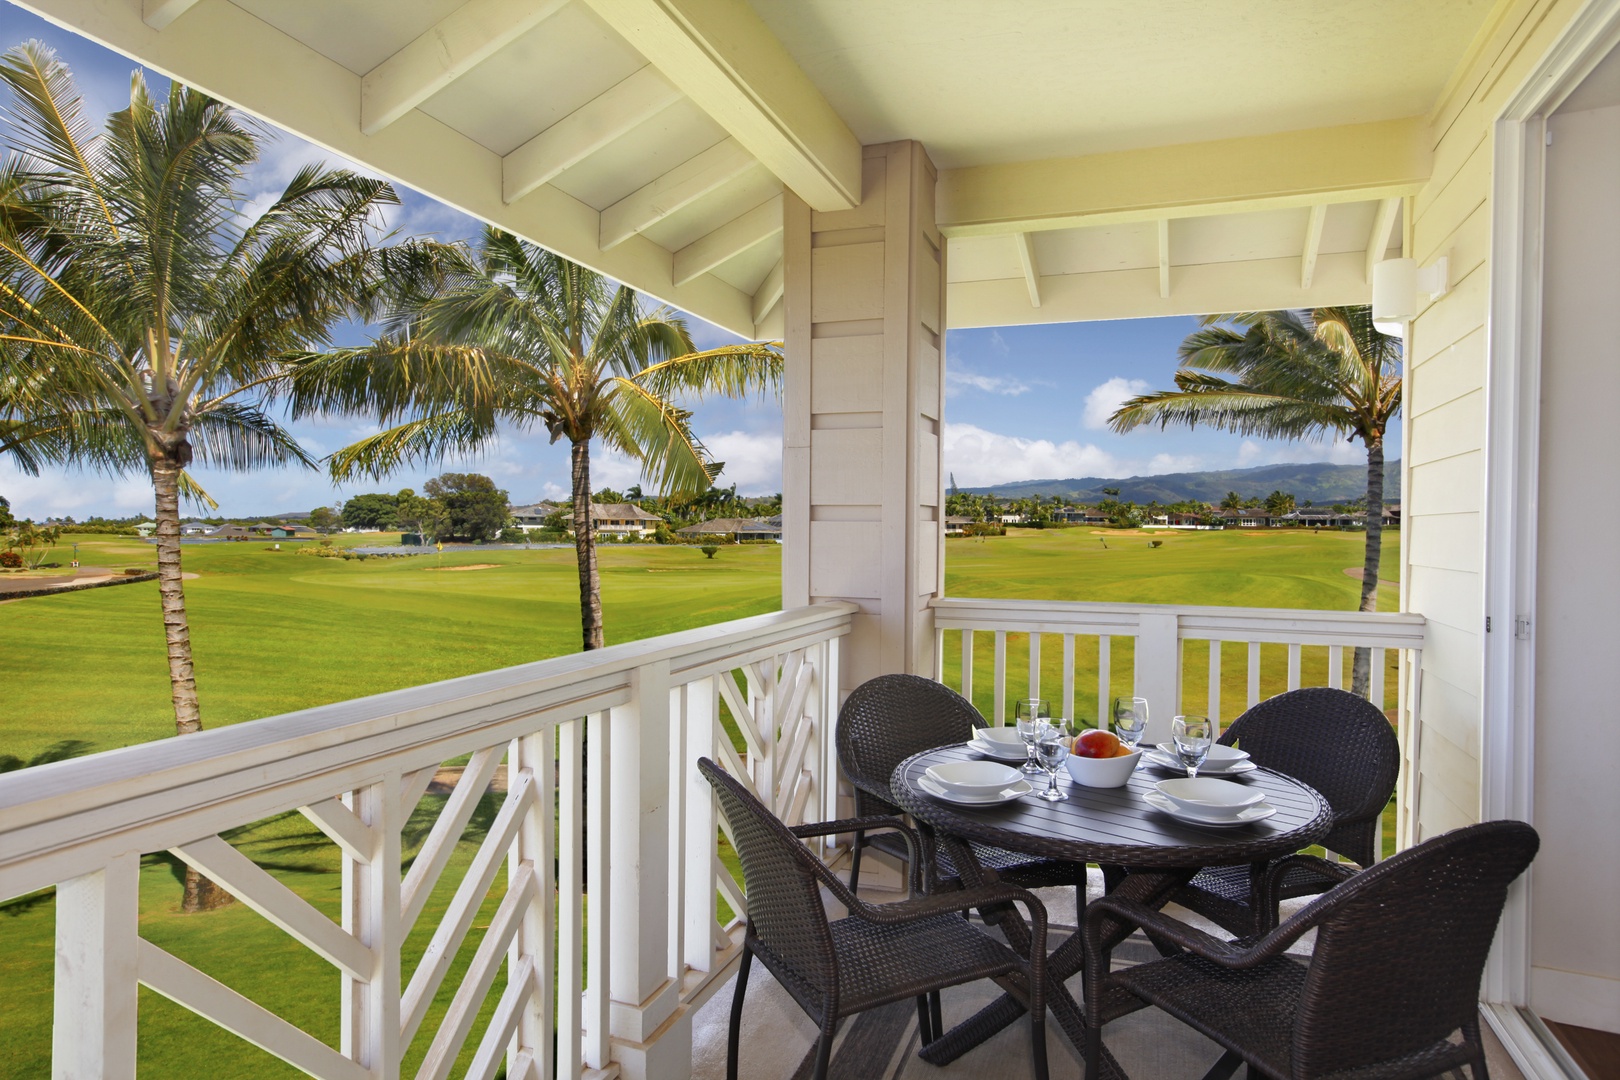 Koloa Vacation Rentals, Pili Mai 11I - Beautifully decorated with new plush furniture  Tropically landscaped exterior  Covered lanai with golf course and ocean views  Shared Gas BBQ